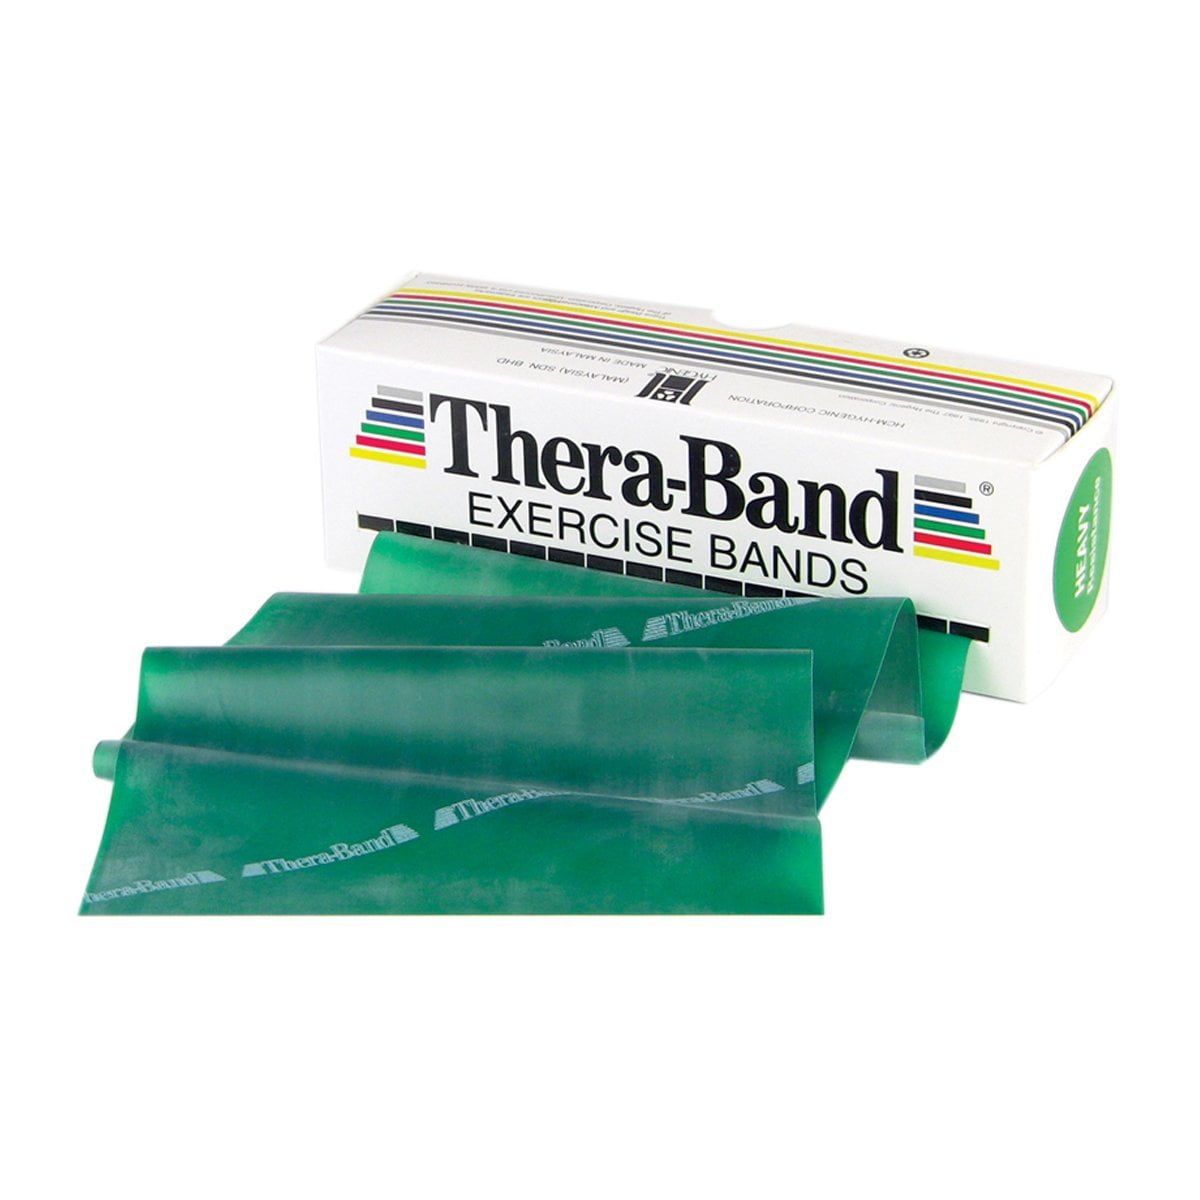 TheraBand Exercise Band SILVER 5 FT individually packaged FREE SHIPPING 